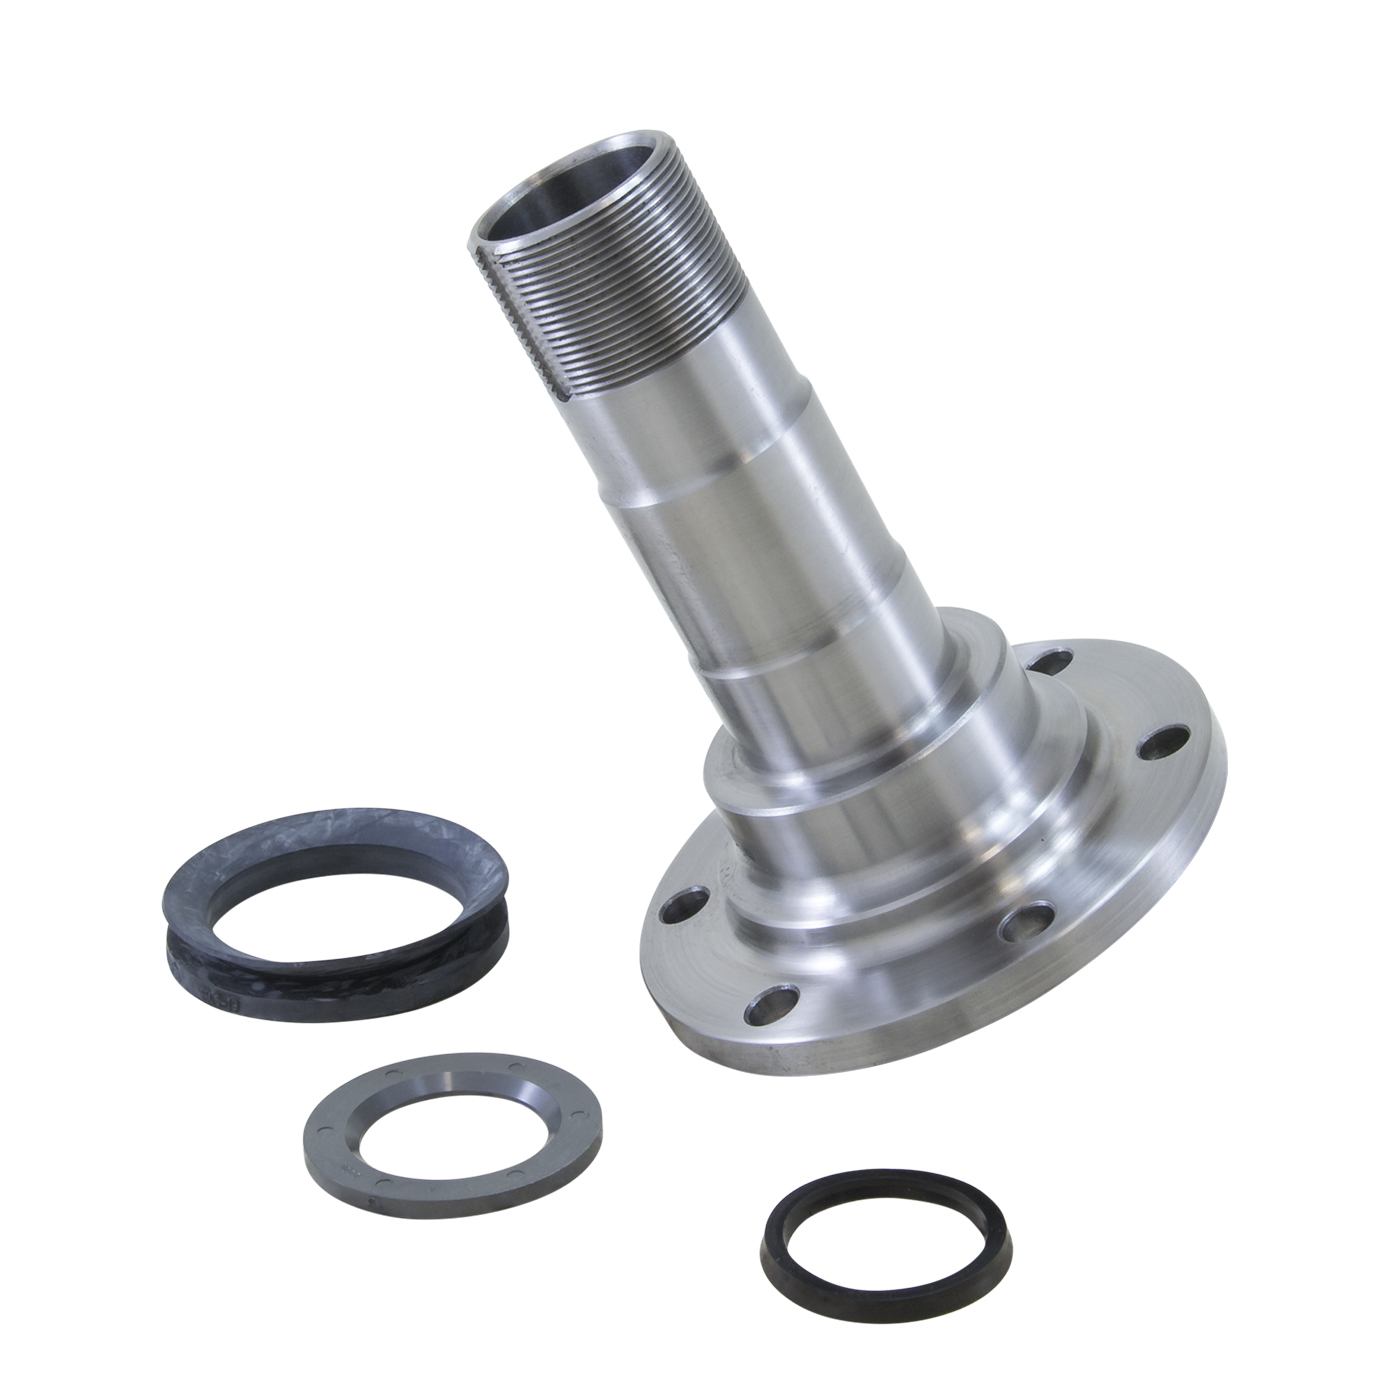 Replacement front spindle for Dana 44, GM 